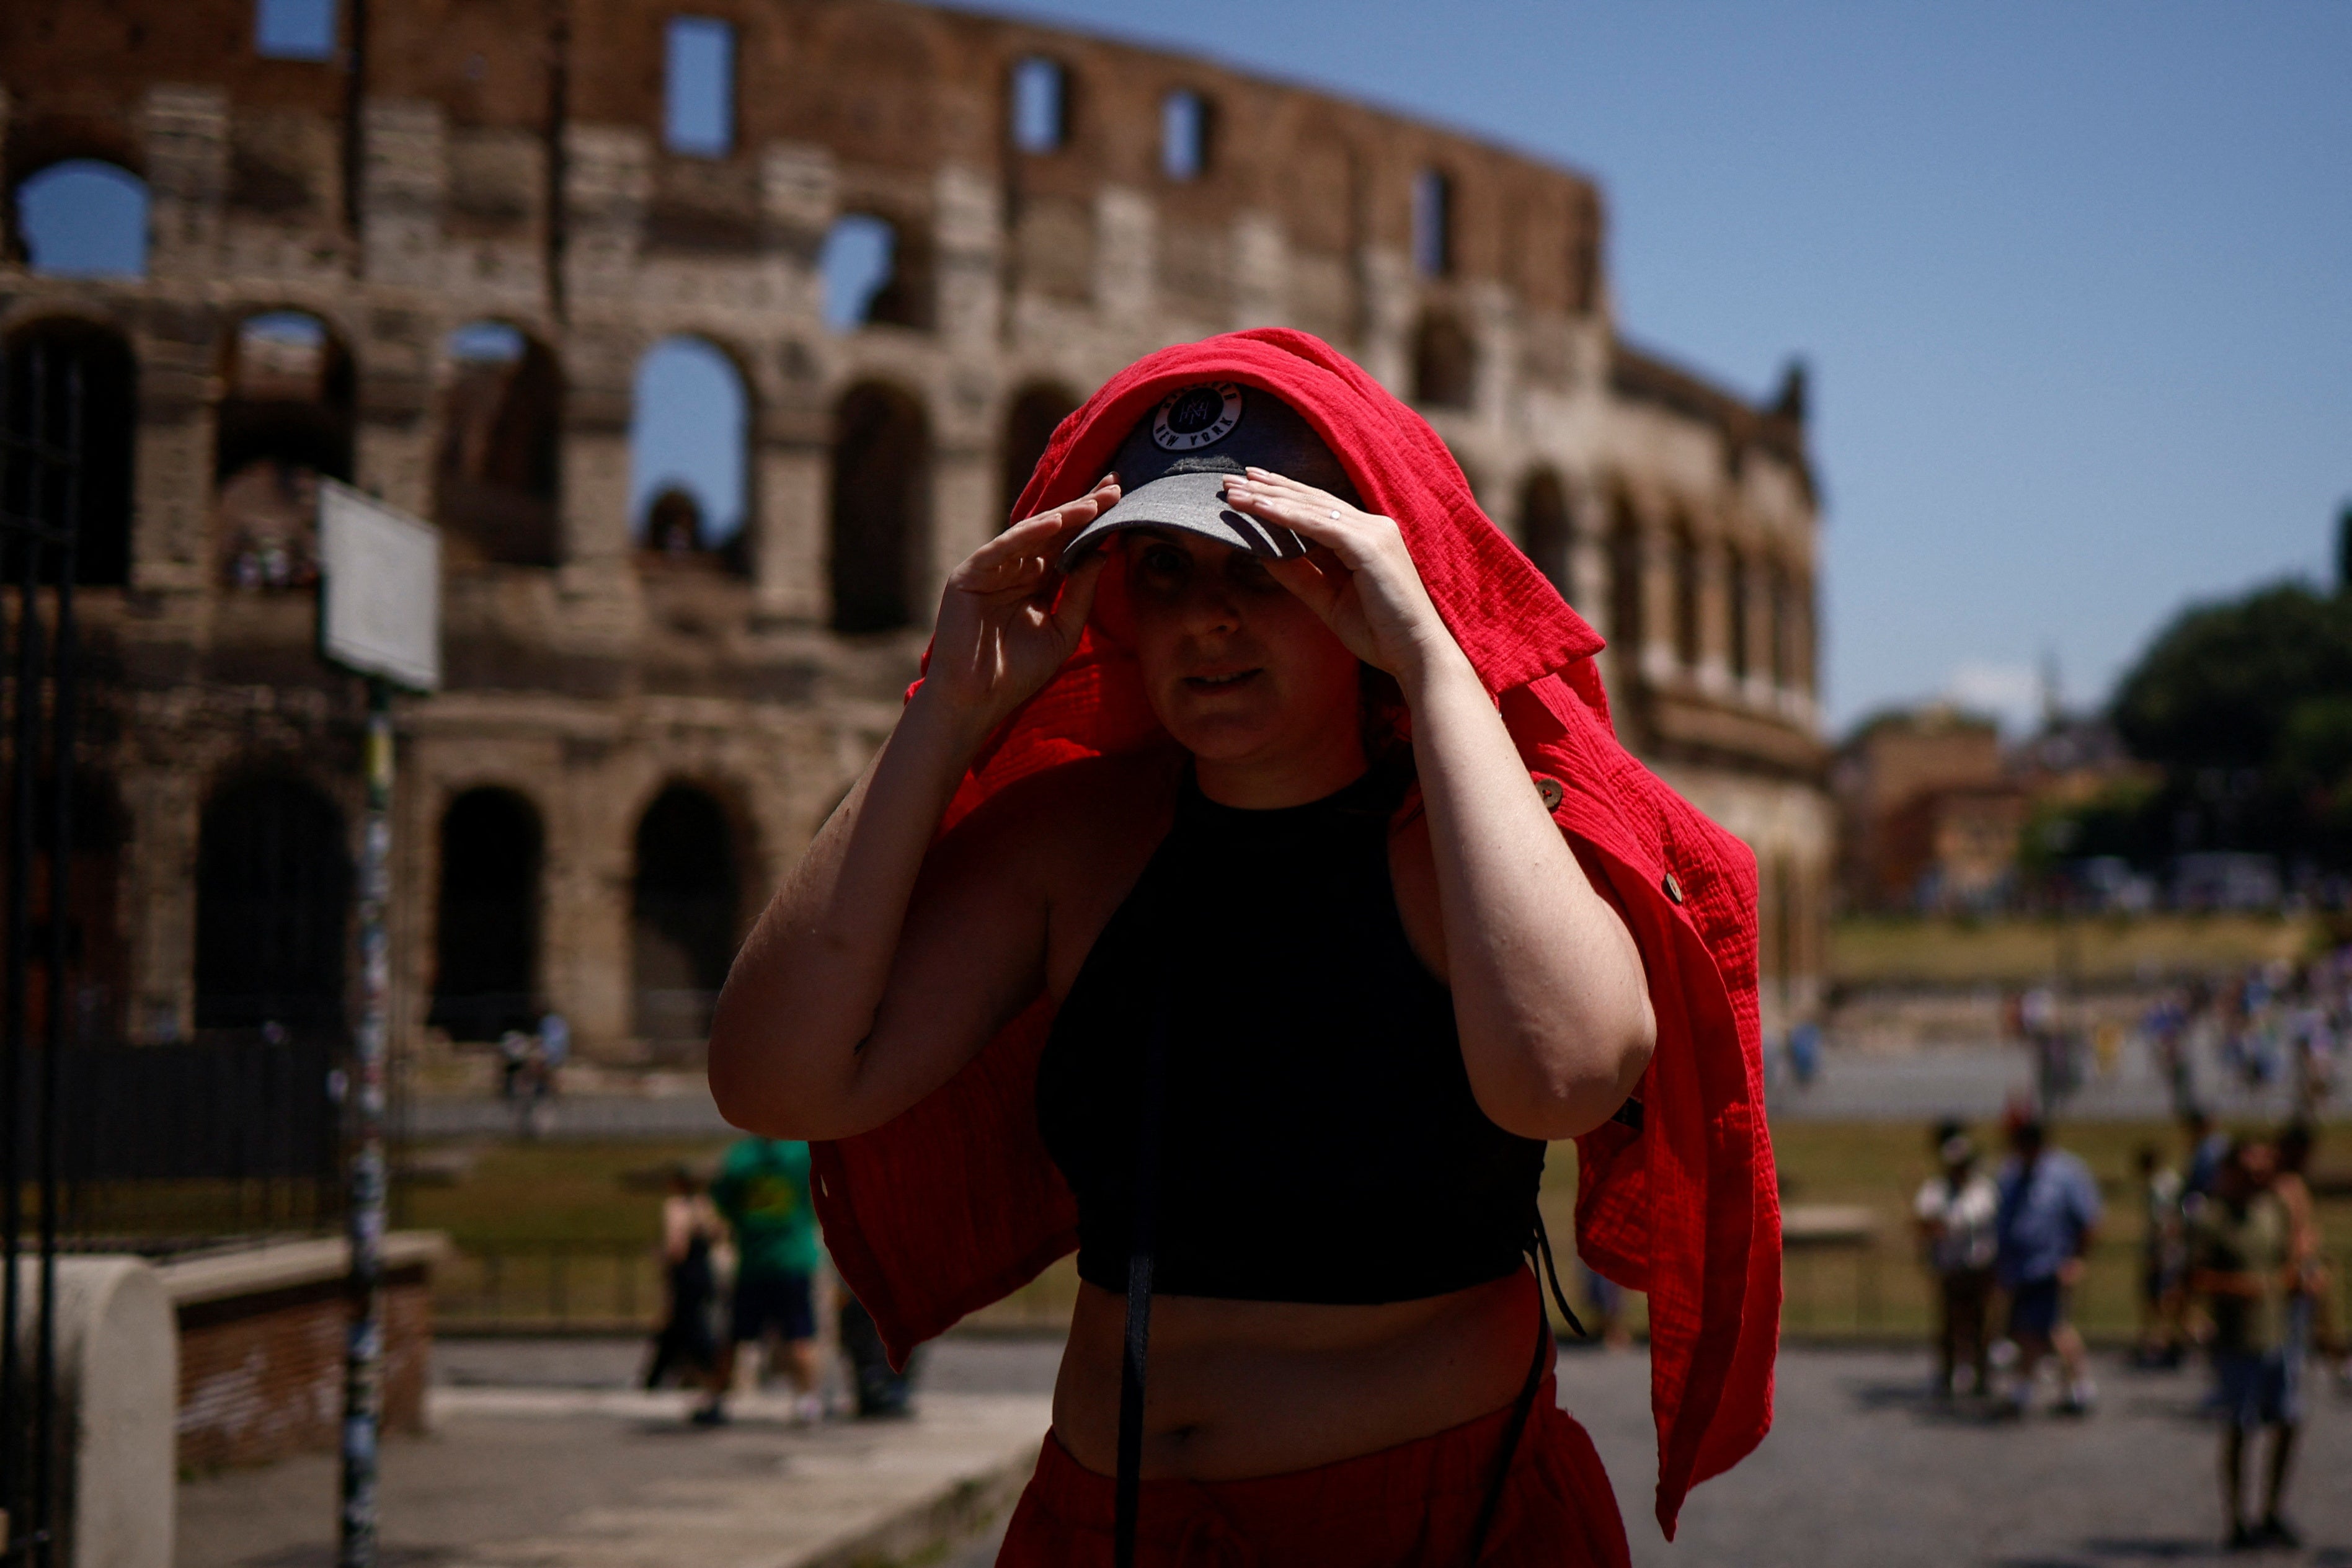 A woman shelters from the sun with a shirt near the Colosseum in Rome